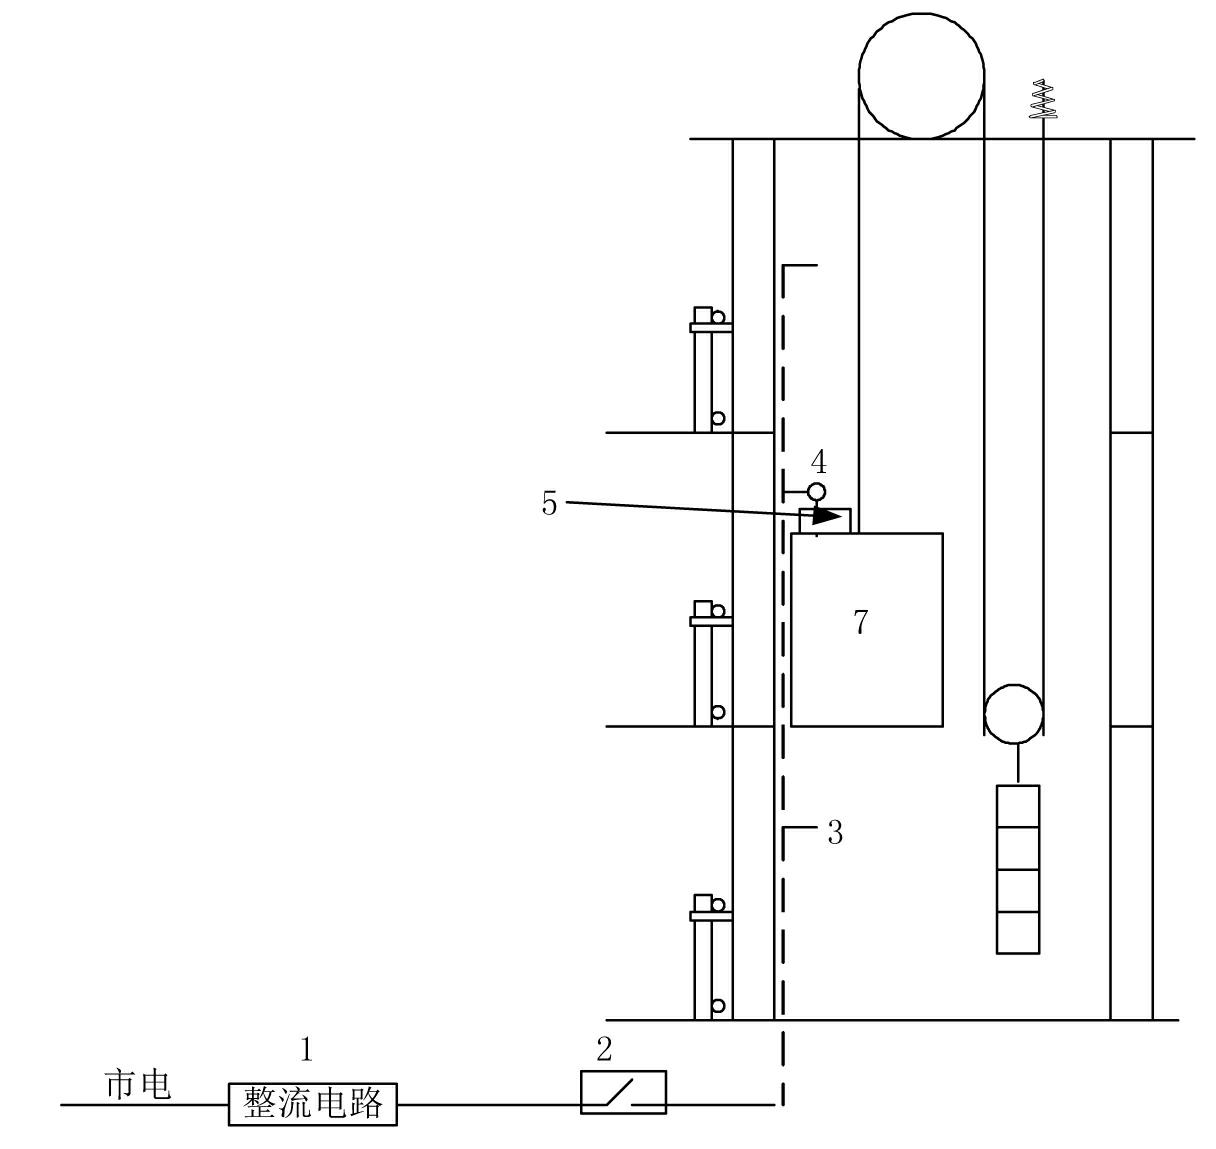 Contact type elevator power transmission system